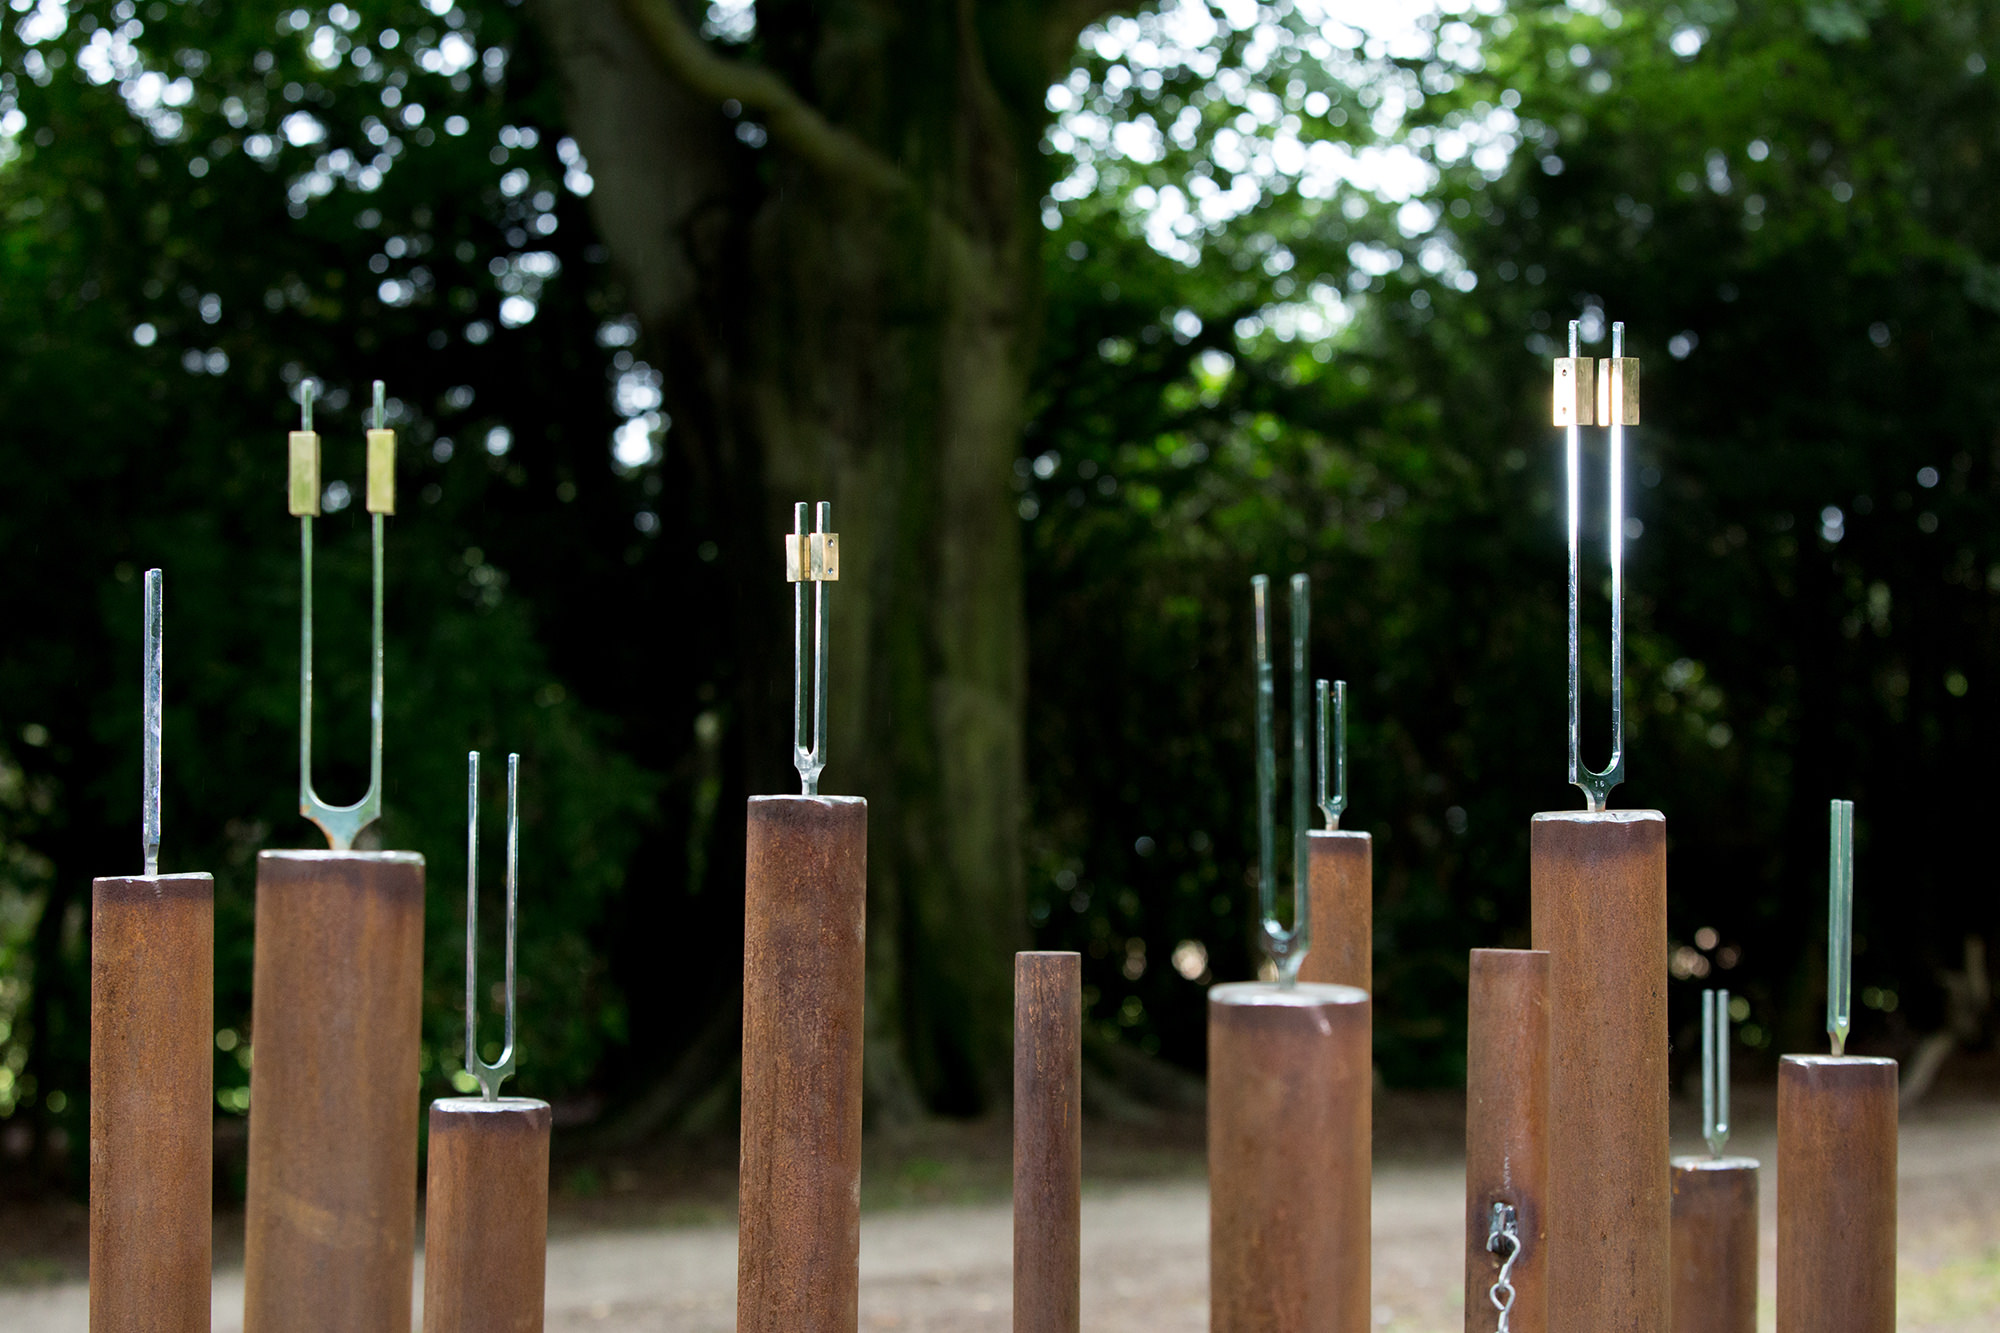 Caroline Locke The Frequency of Trees 2014 at Yorkshire Sculpture Park